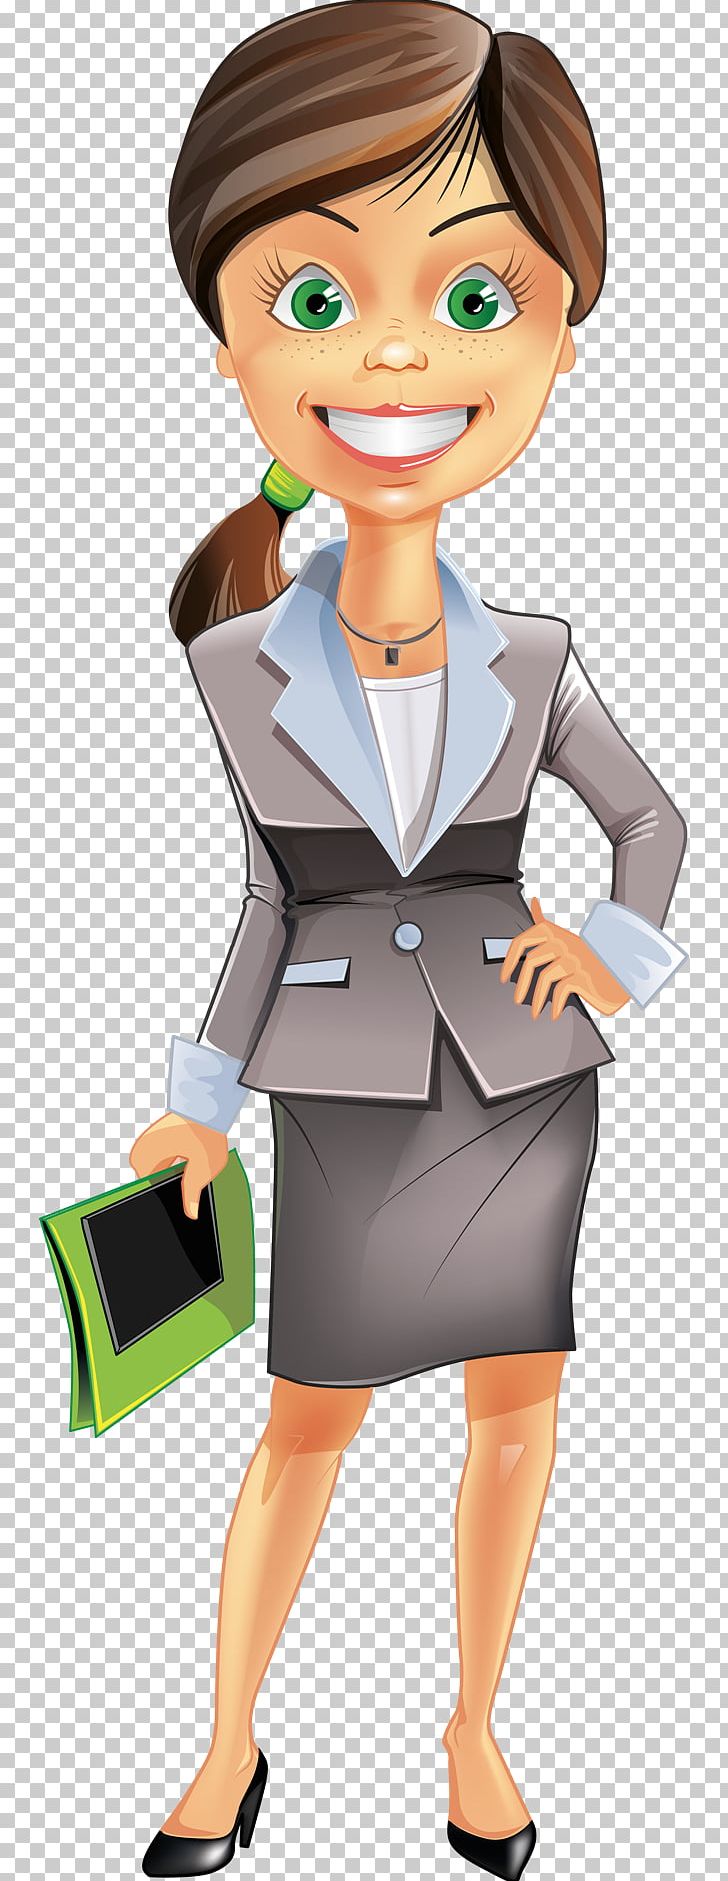 Businessperson Cartoon Drawing PNG, Clipart, Animation, Business, Businessperson, Cartoon, Drawing Free PNG Download